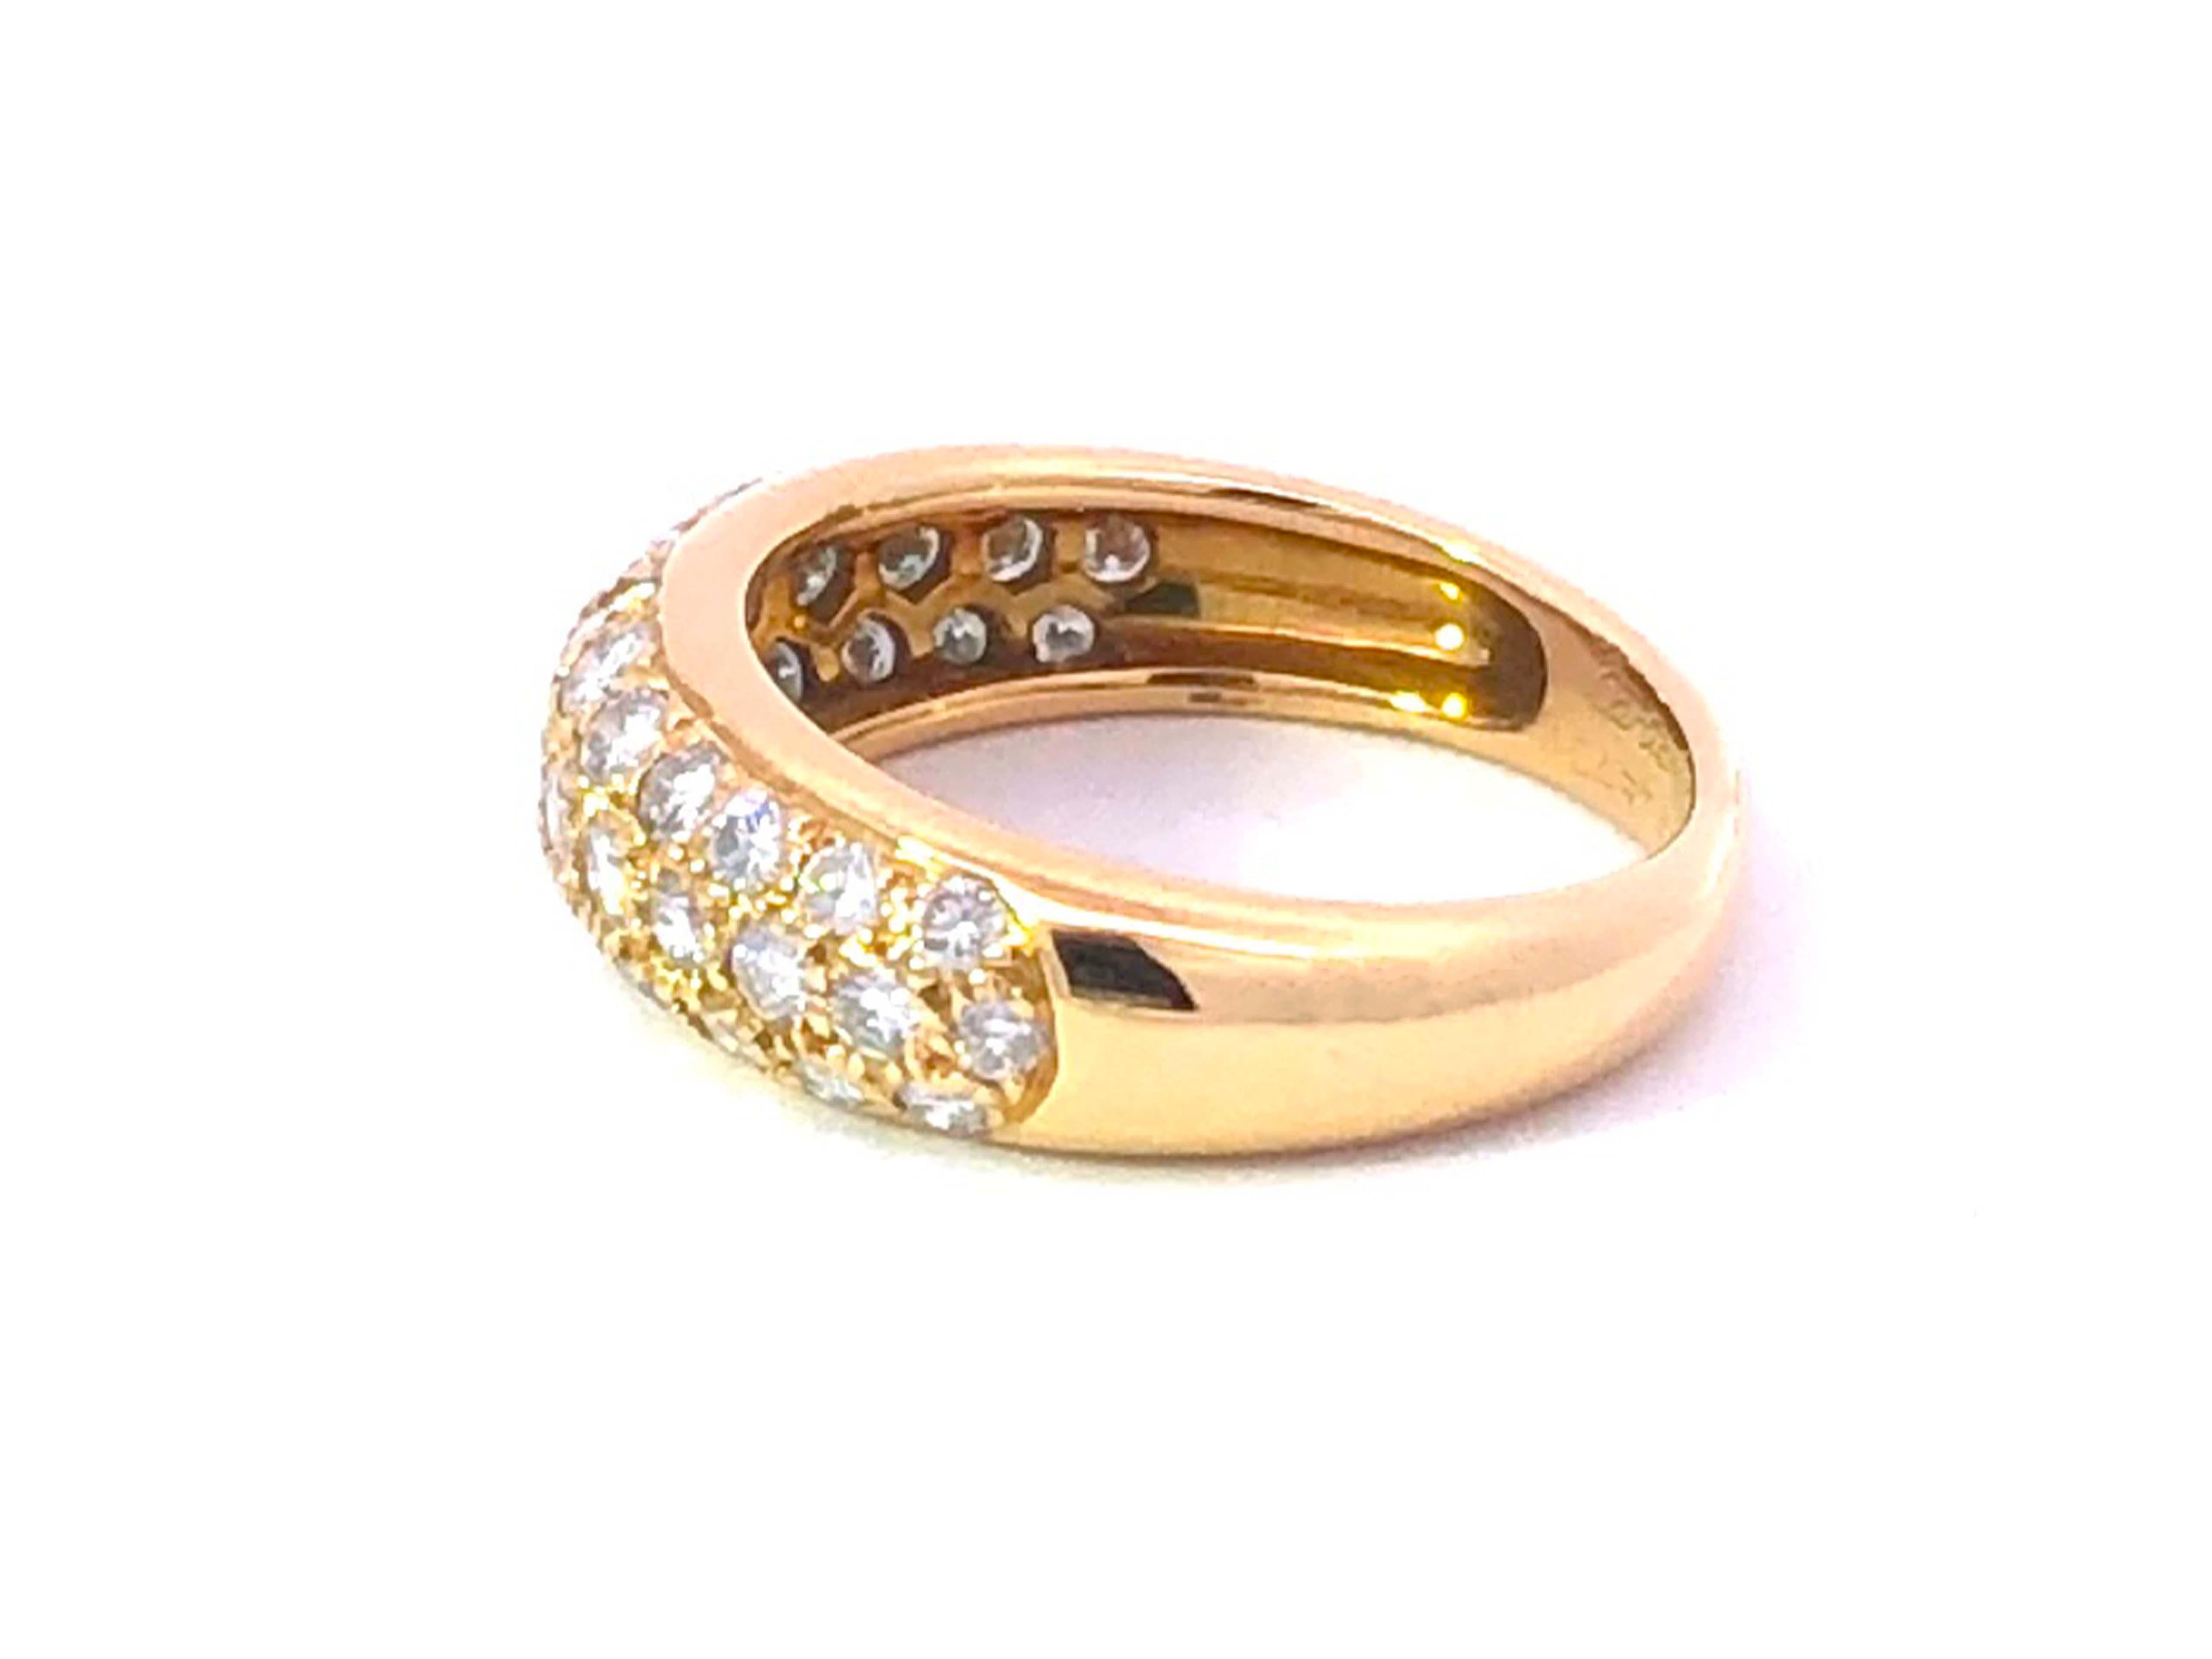 Vintage Étincelle De Cartier Diamond Ring in 18k Yellow Gold In Excellent Condition For Sale In Honolulu, HI